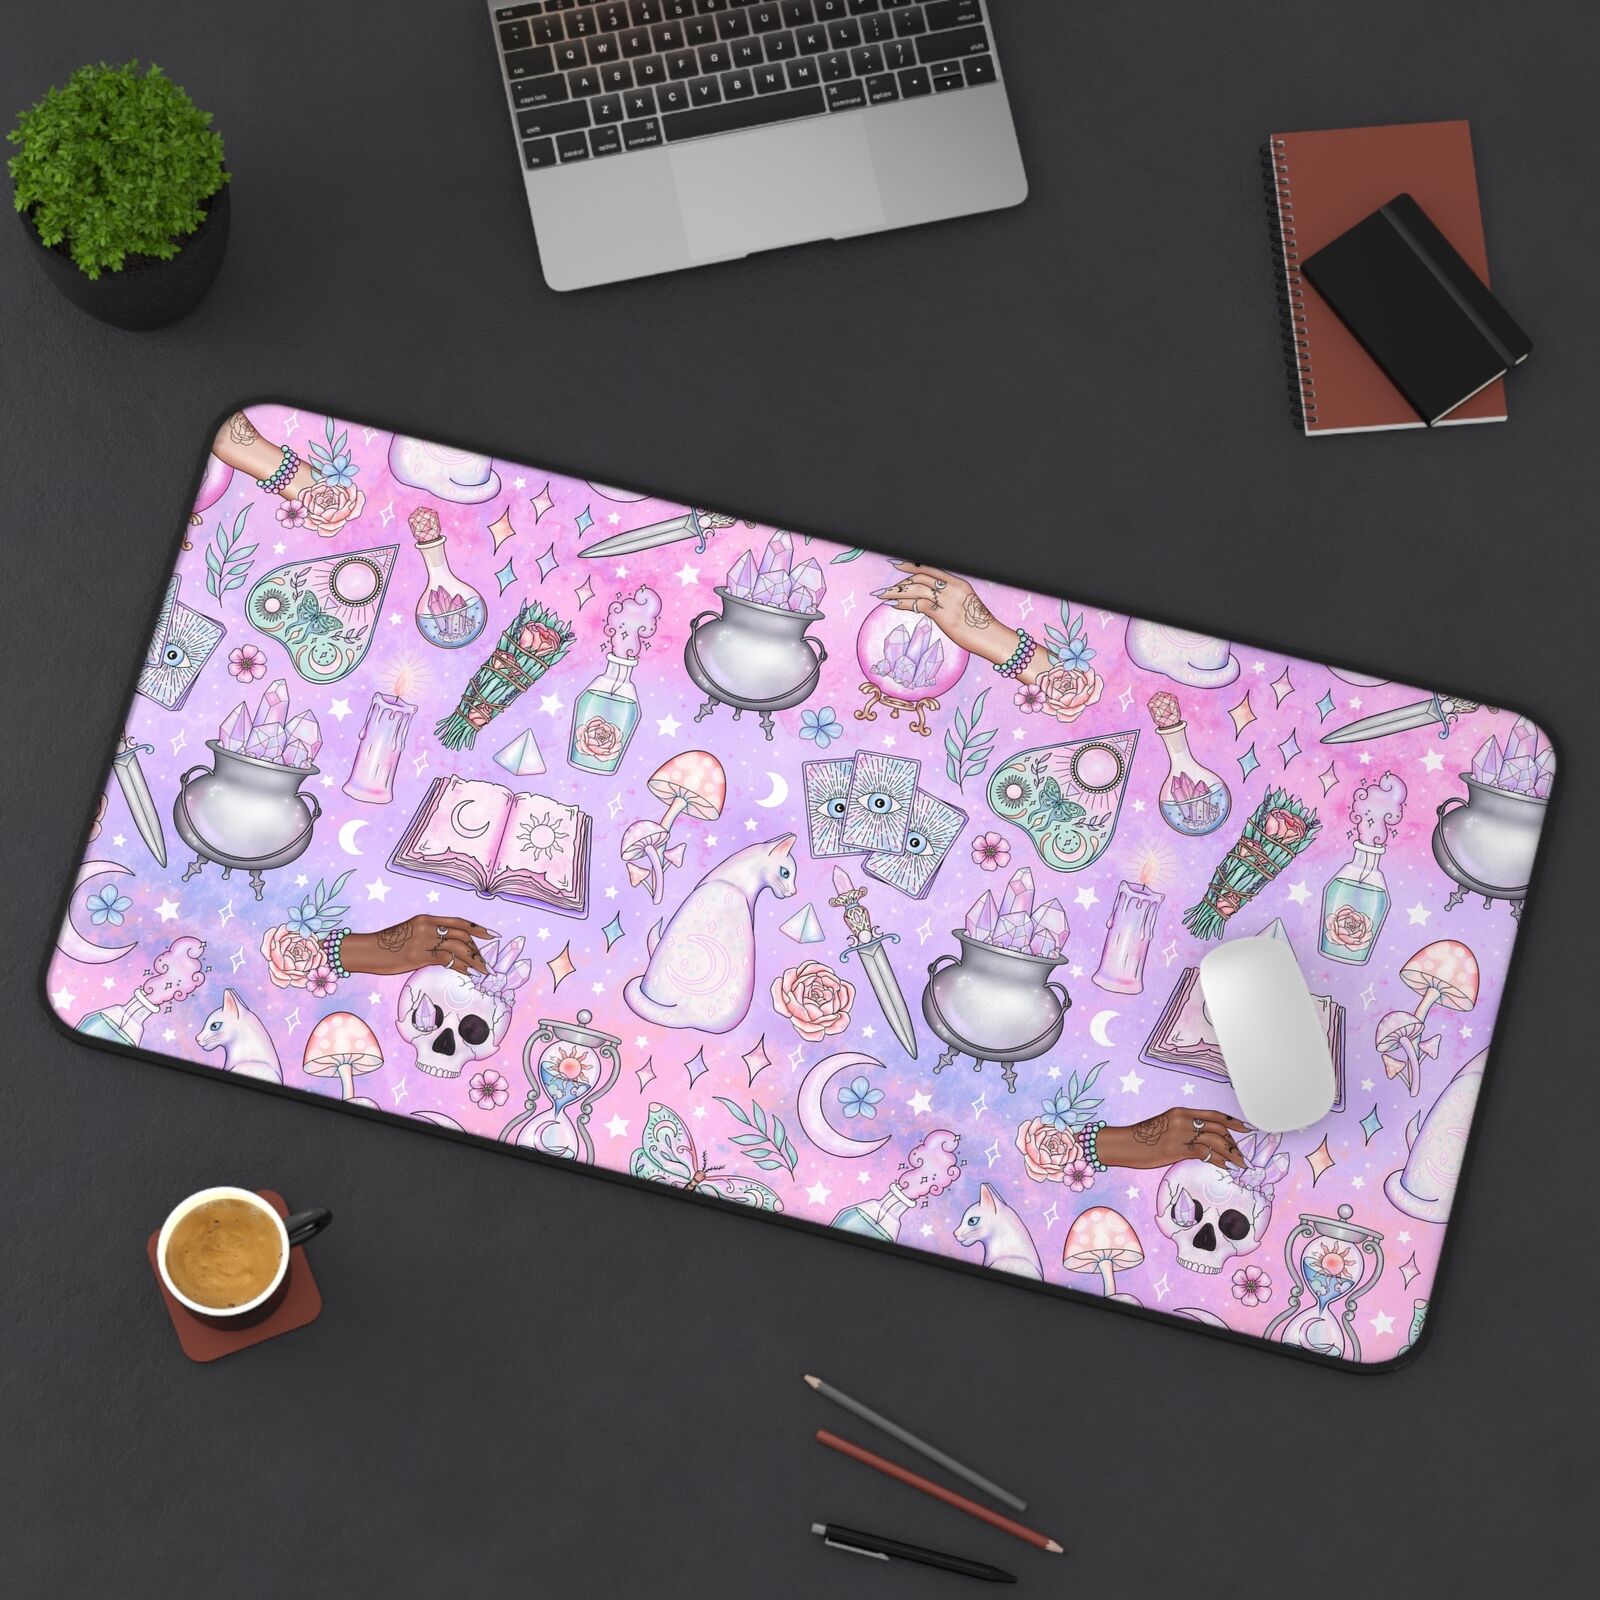 Witchy Desk Mat, TCG Playmat, Colorful Magic, 2 Sizes